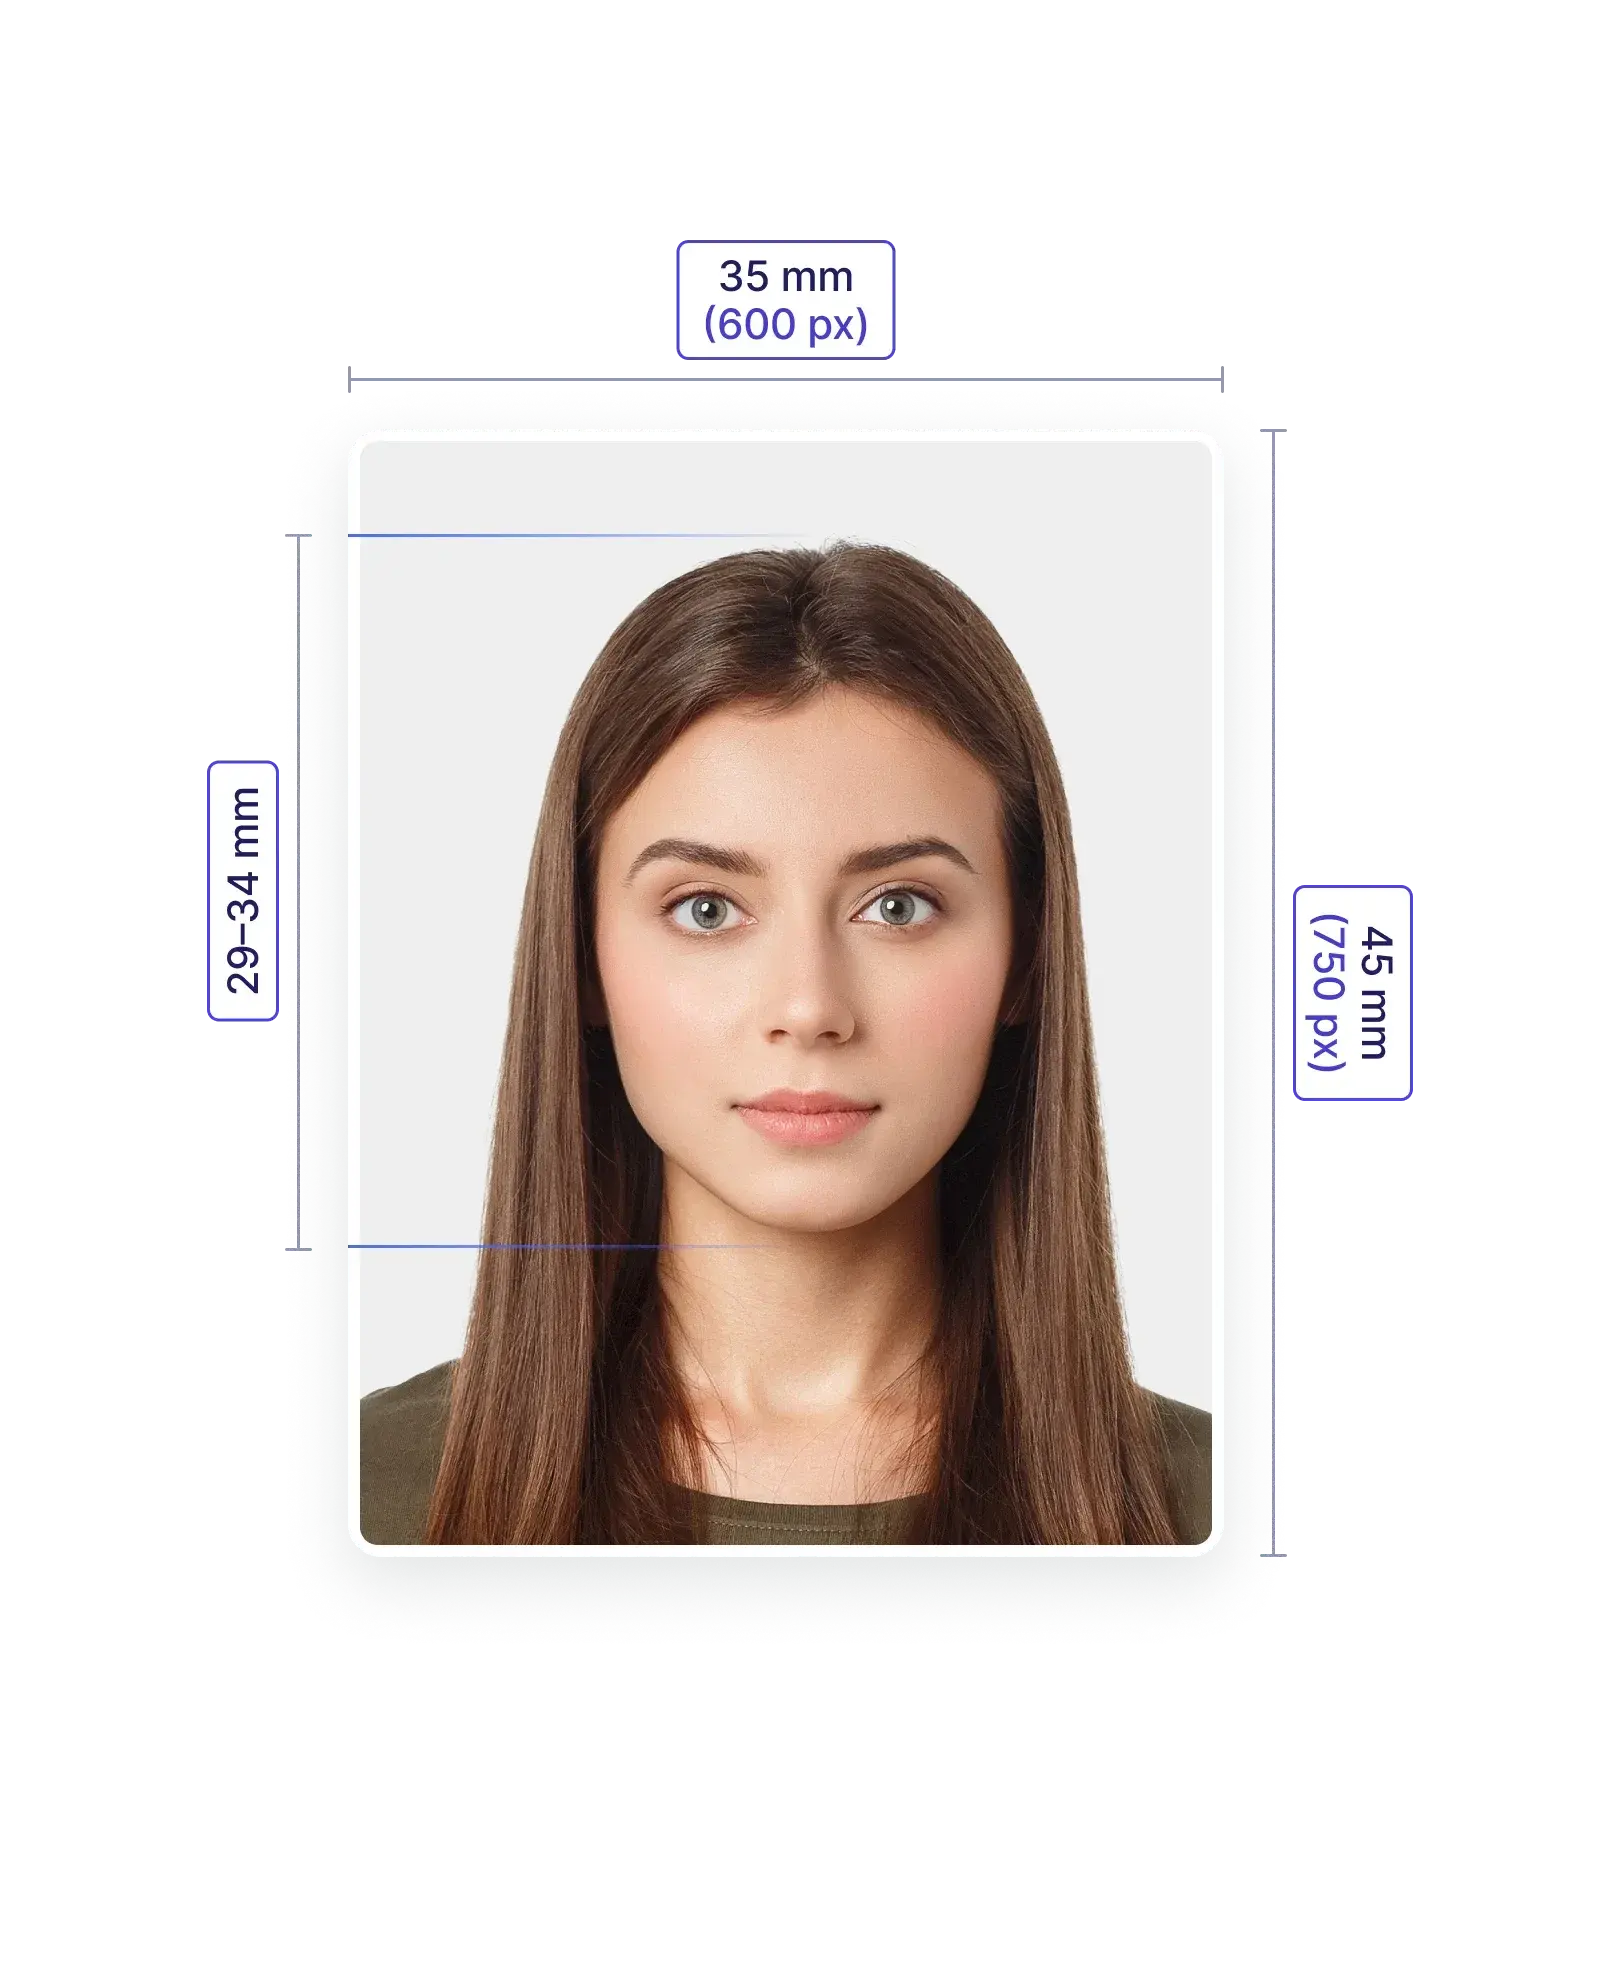 Passport photo at Tesco—specifications